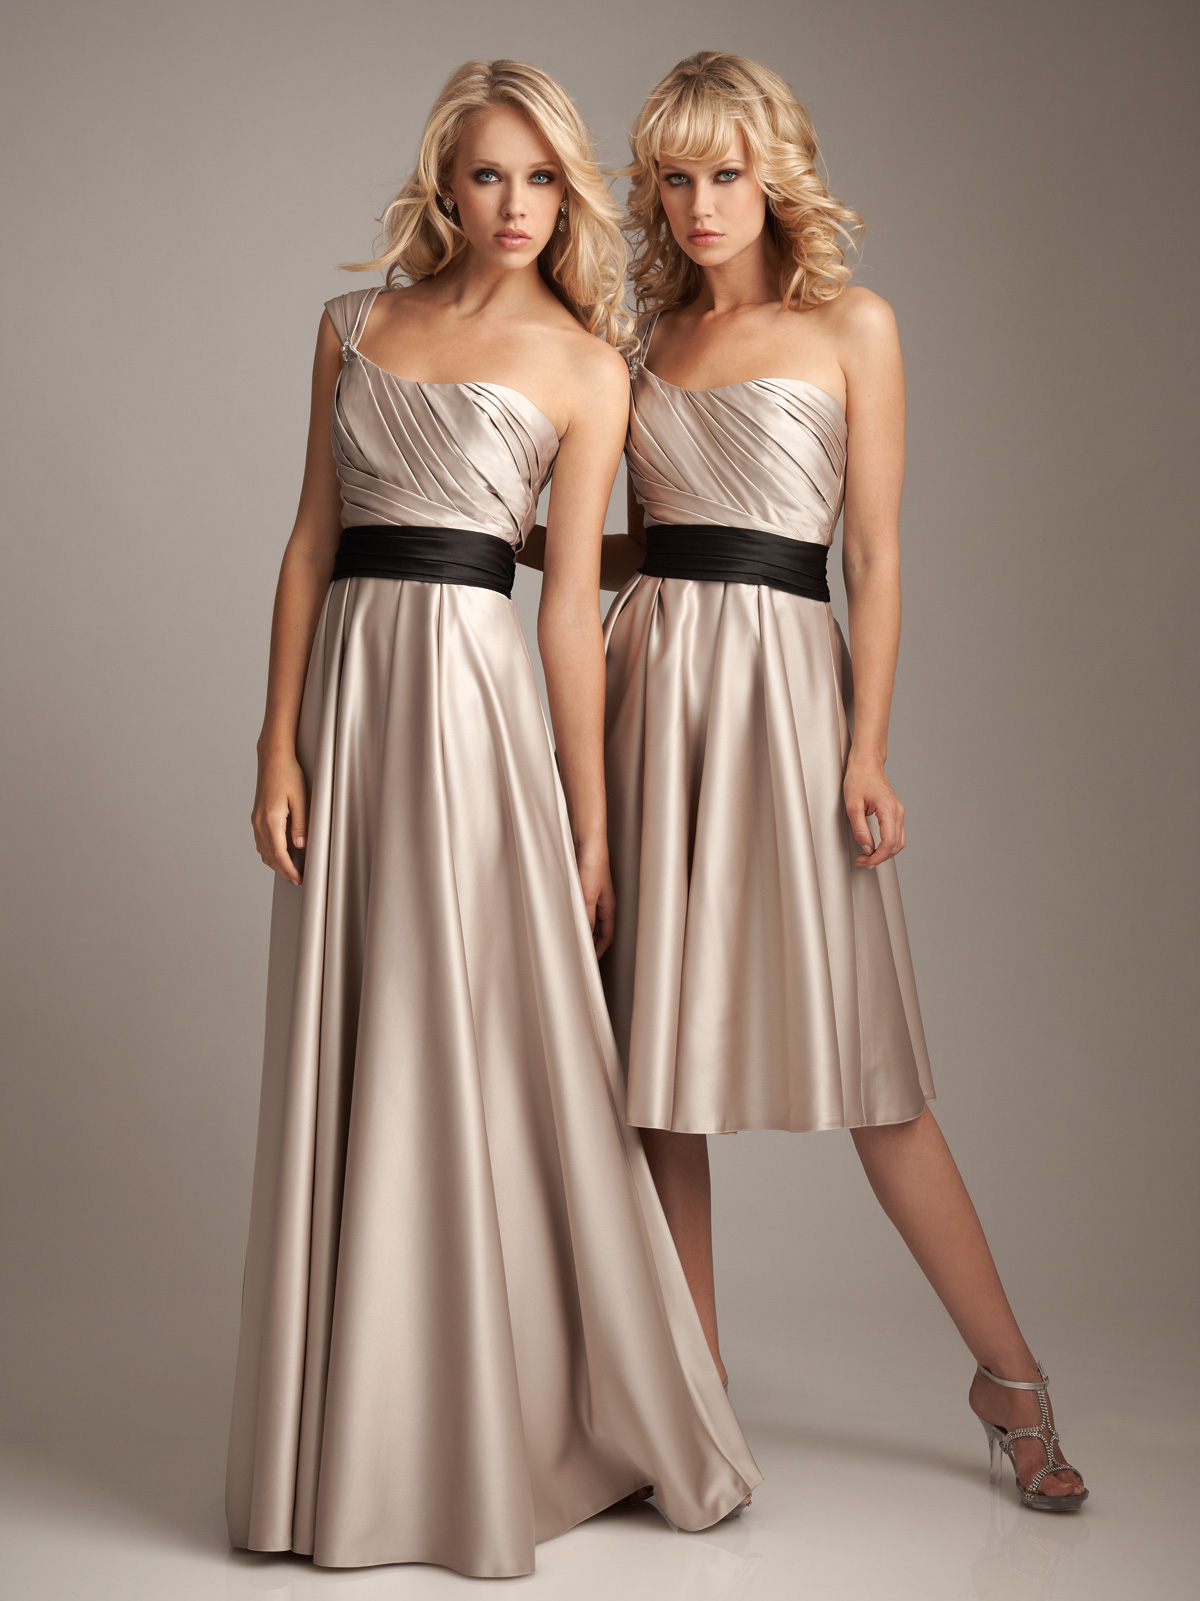 ivory and brown one shoulder bridesmaid dress 